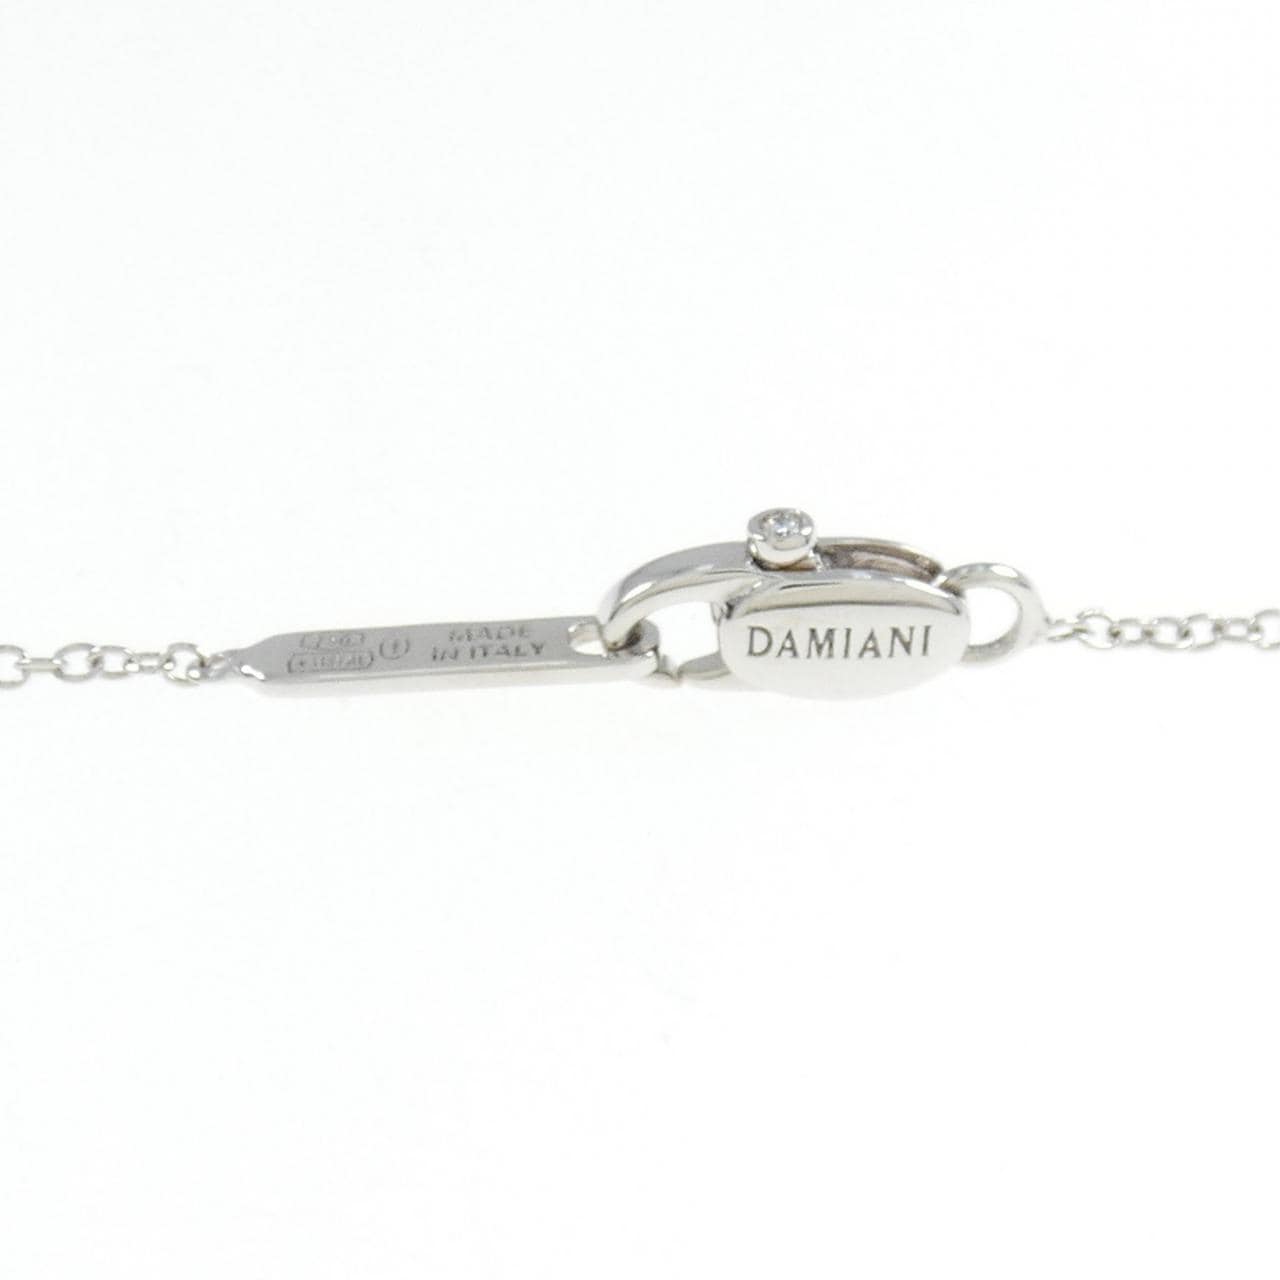 [BRAND NEW] DAMIANI Belle Epoque Crown Necklace